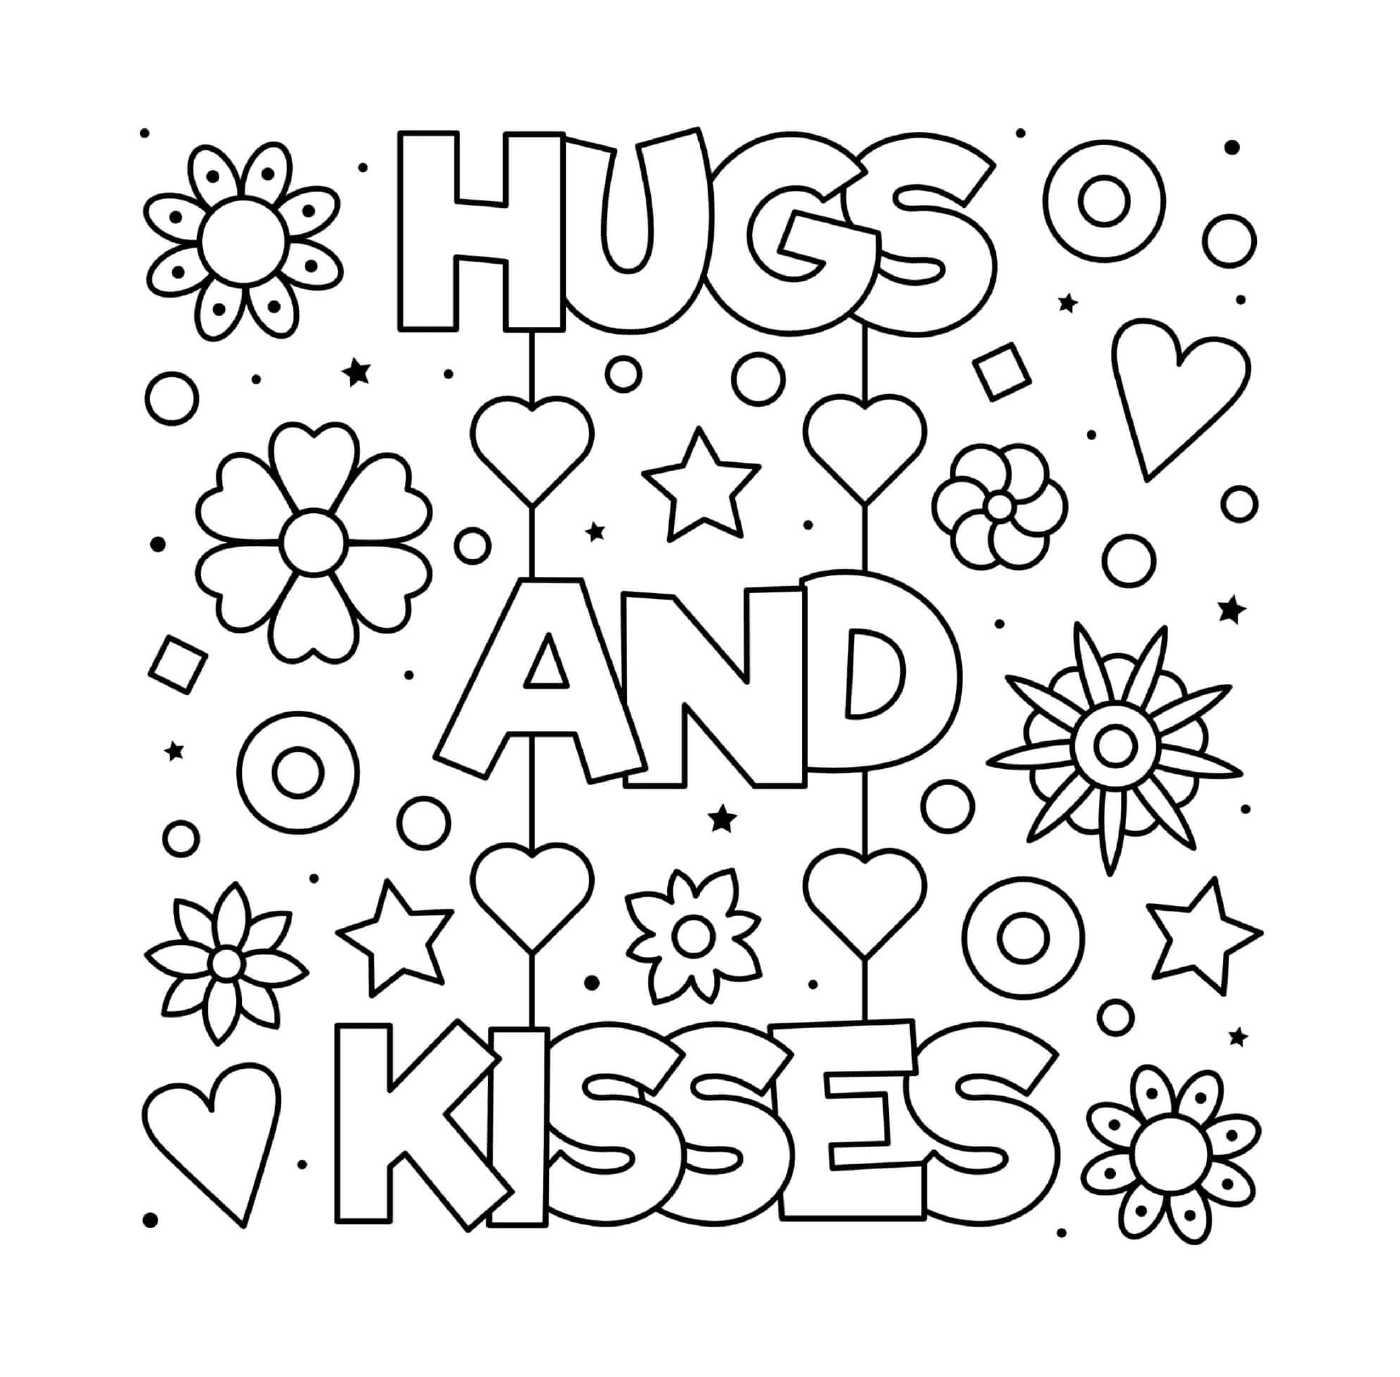  A drawing with the words hugs and kisses 